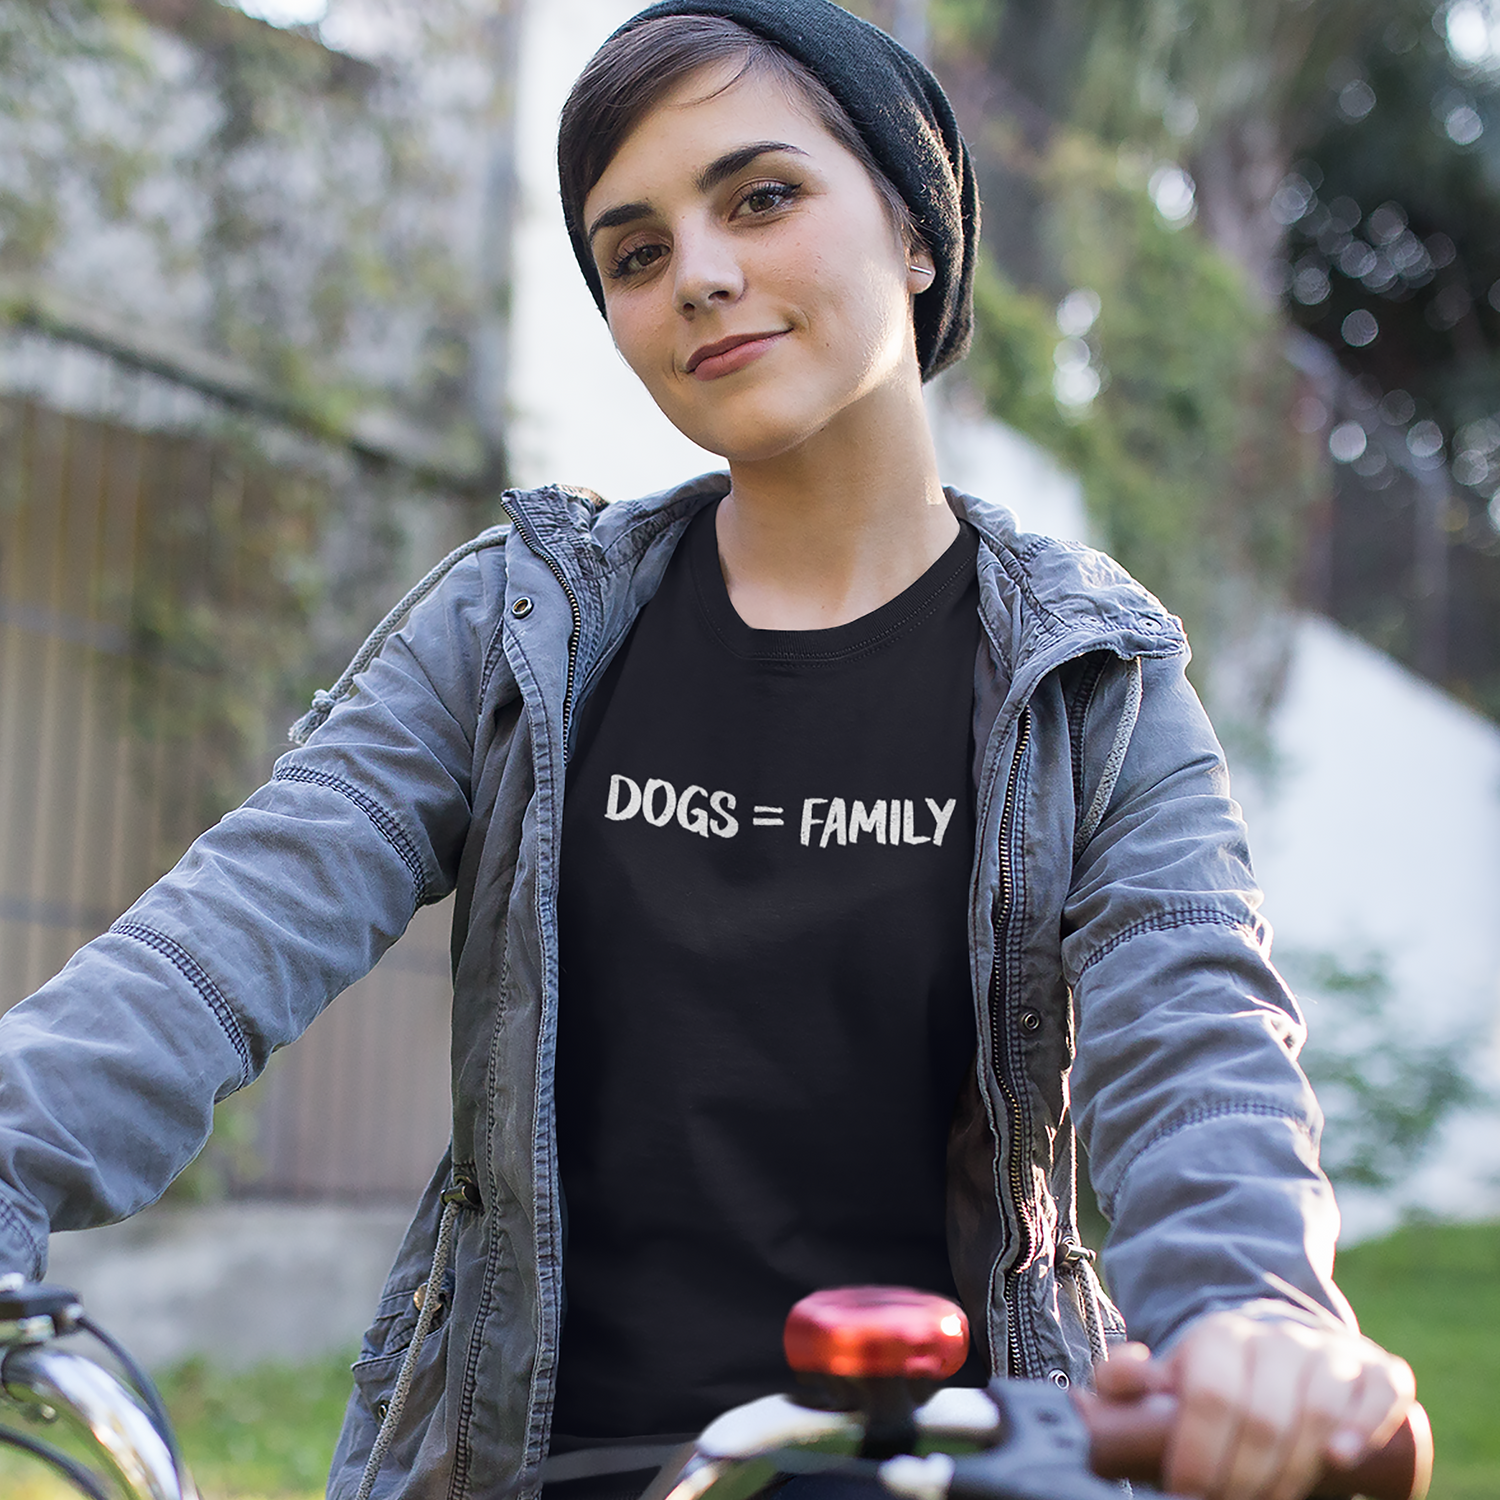 A beautiful girl riding a bike and wearing a black shirt with the message "Dogs = Family"